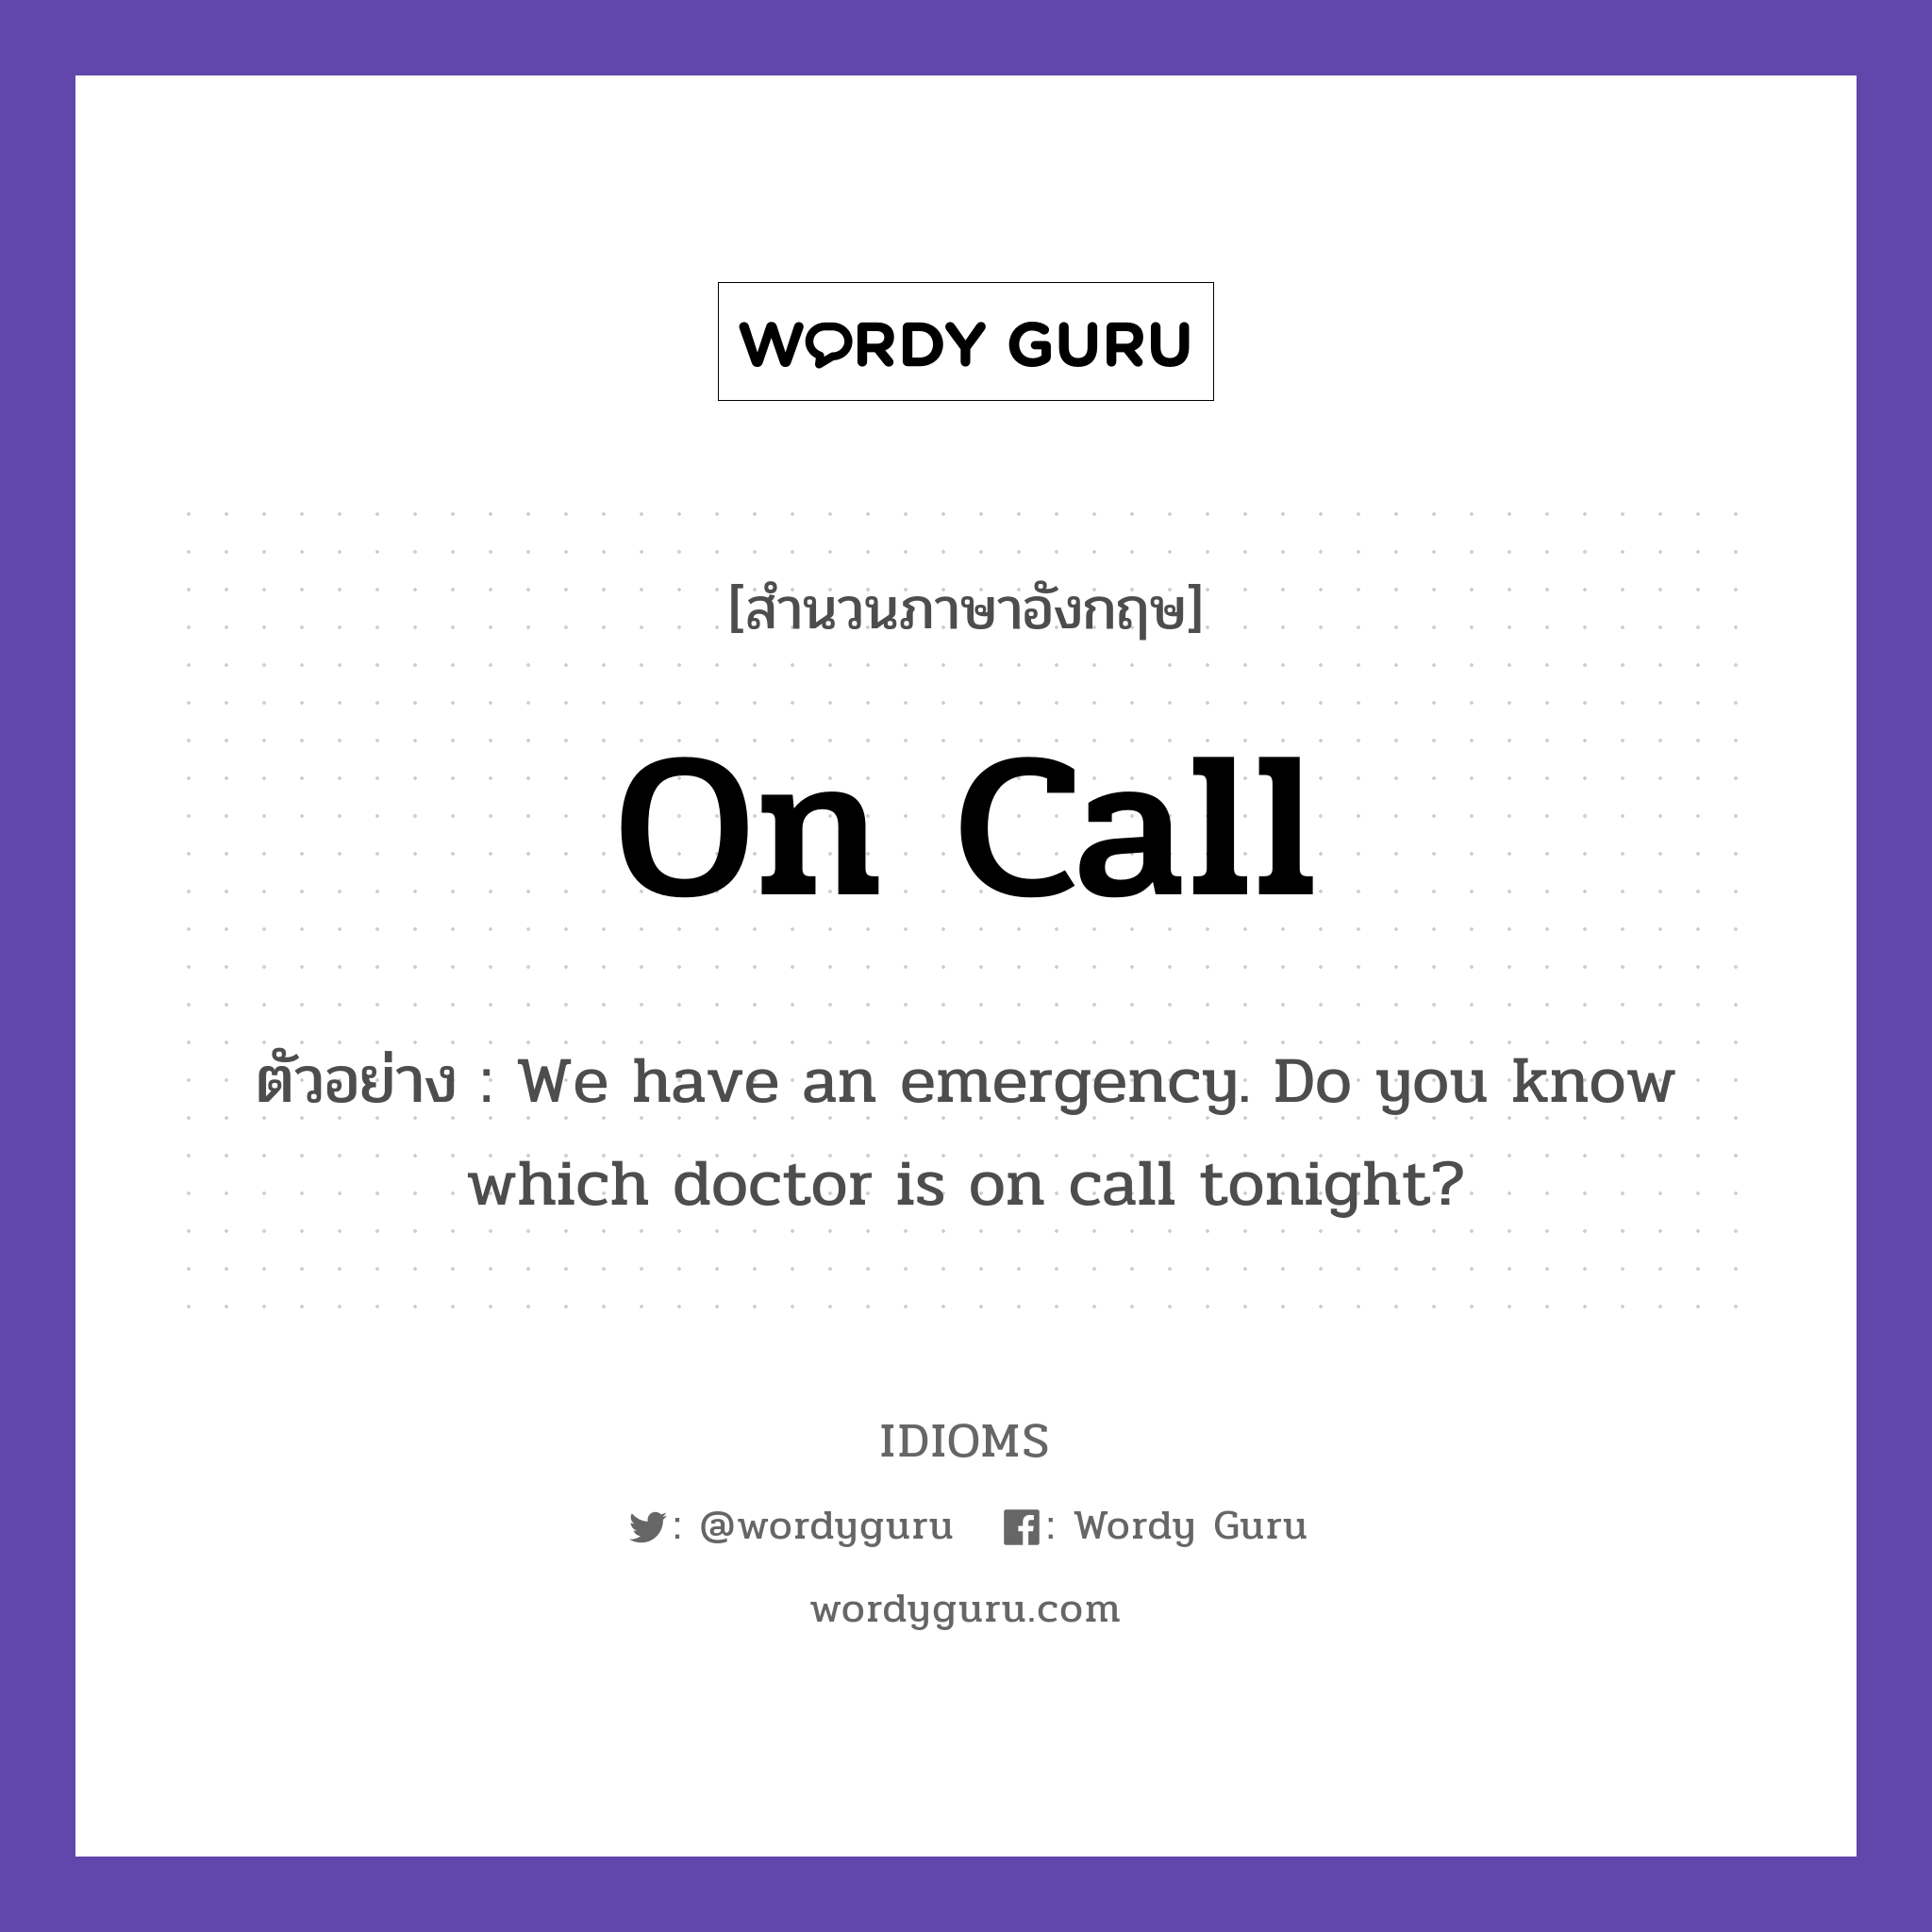 On Call แปลว่า?, สำนวนภาษาอังกฤษ On Call ตัวอย่าง We have an emergency. Do you know which doctor is on call tonight?